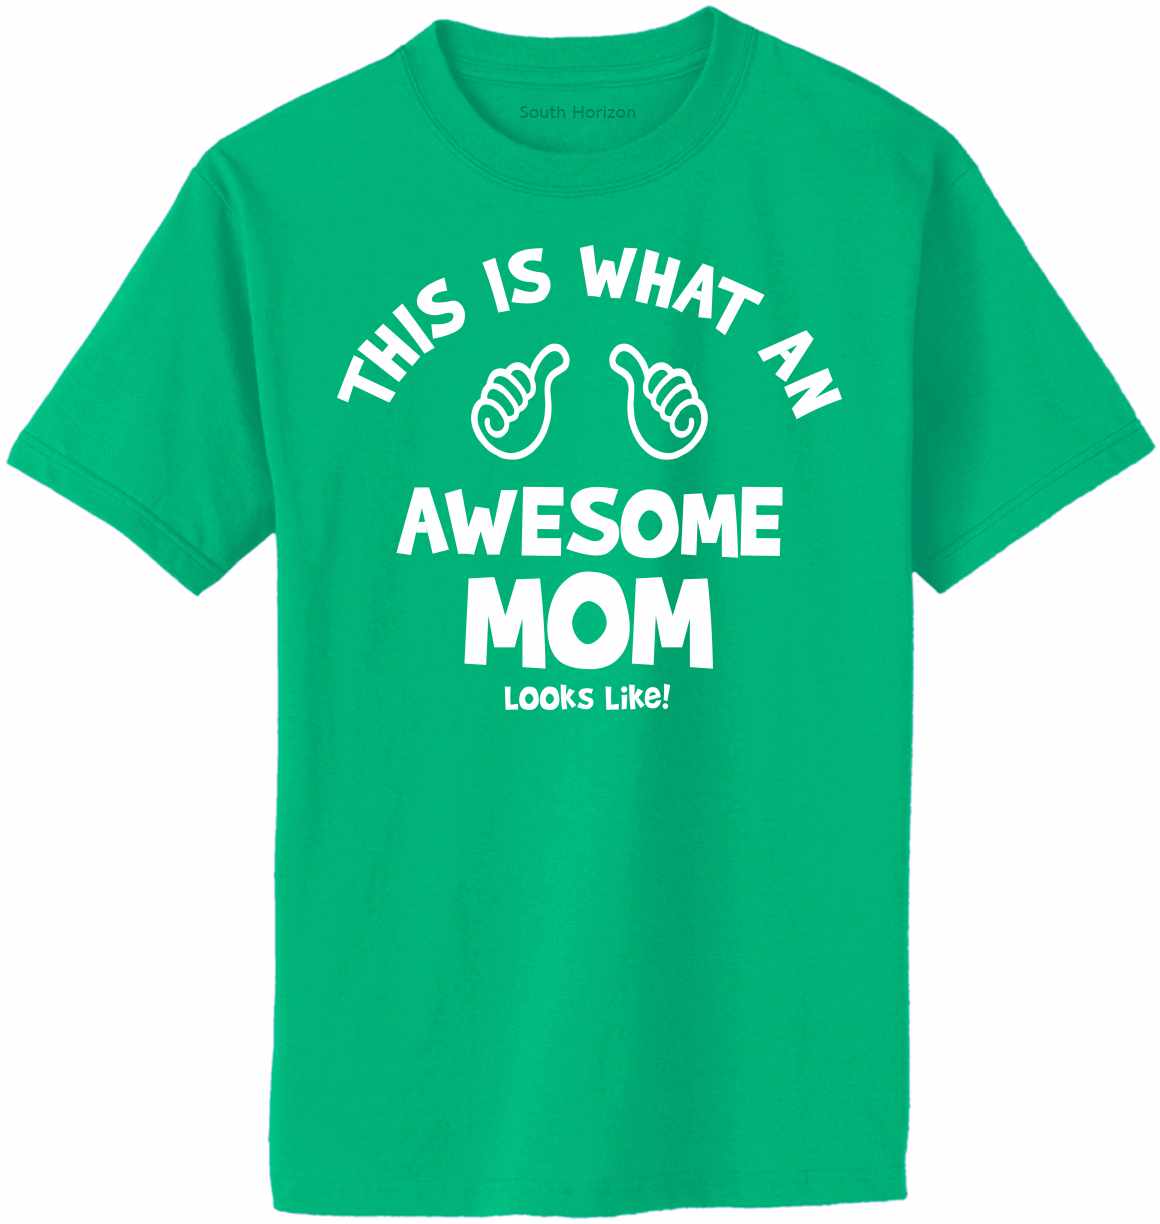 This Is What An Awesome MOM Looks Like Adult T-Shirt (#1092-1)